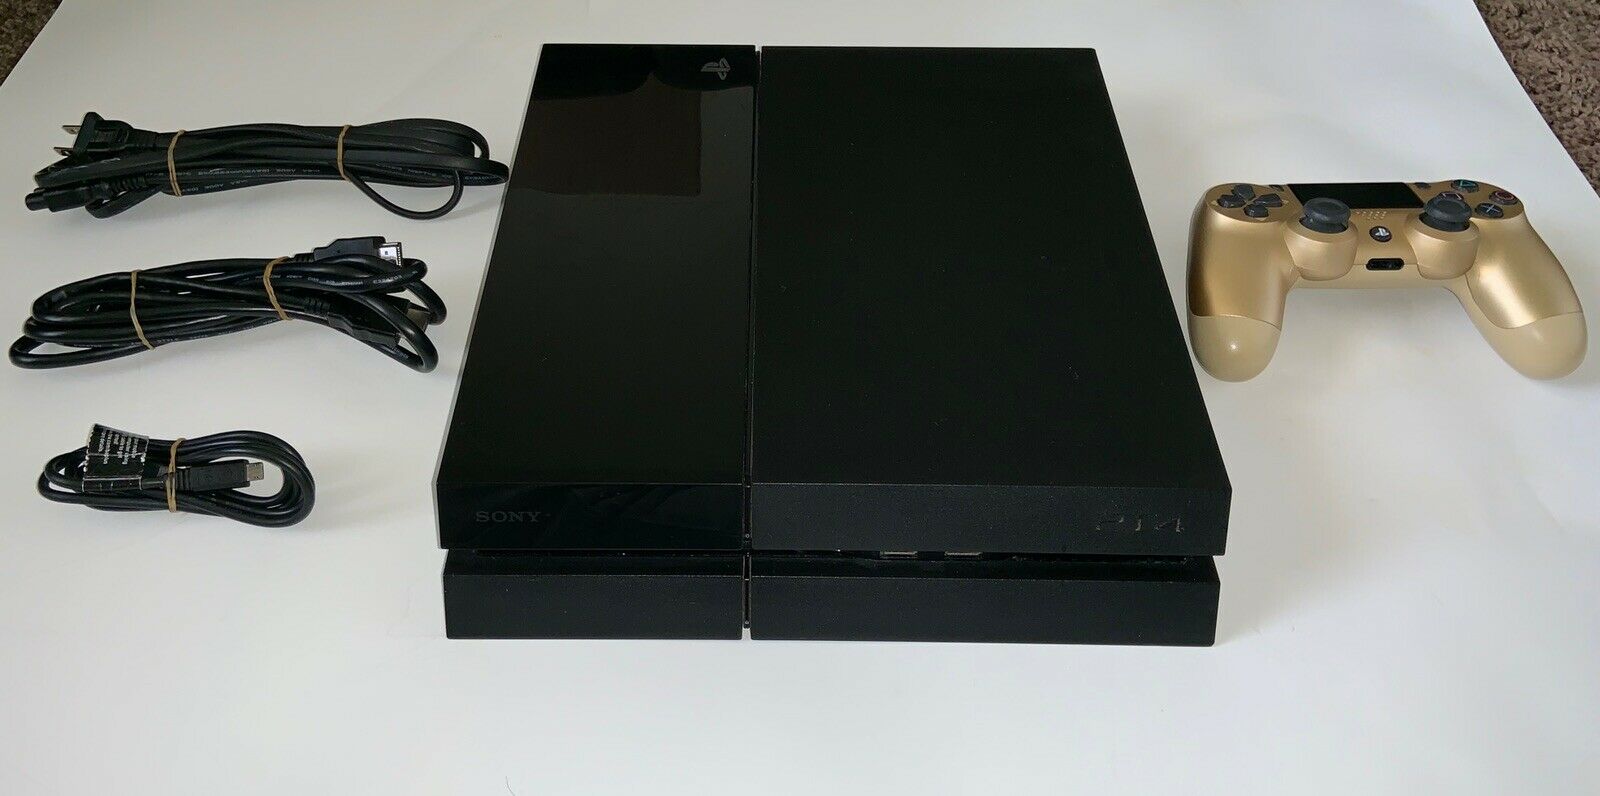 Sony Playstation4 Model CUH-1001A (REFURBISHED AND TESTED) - iCommerce